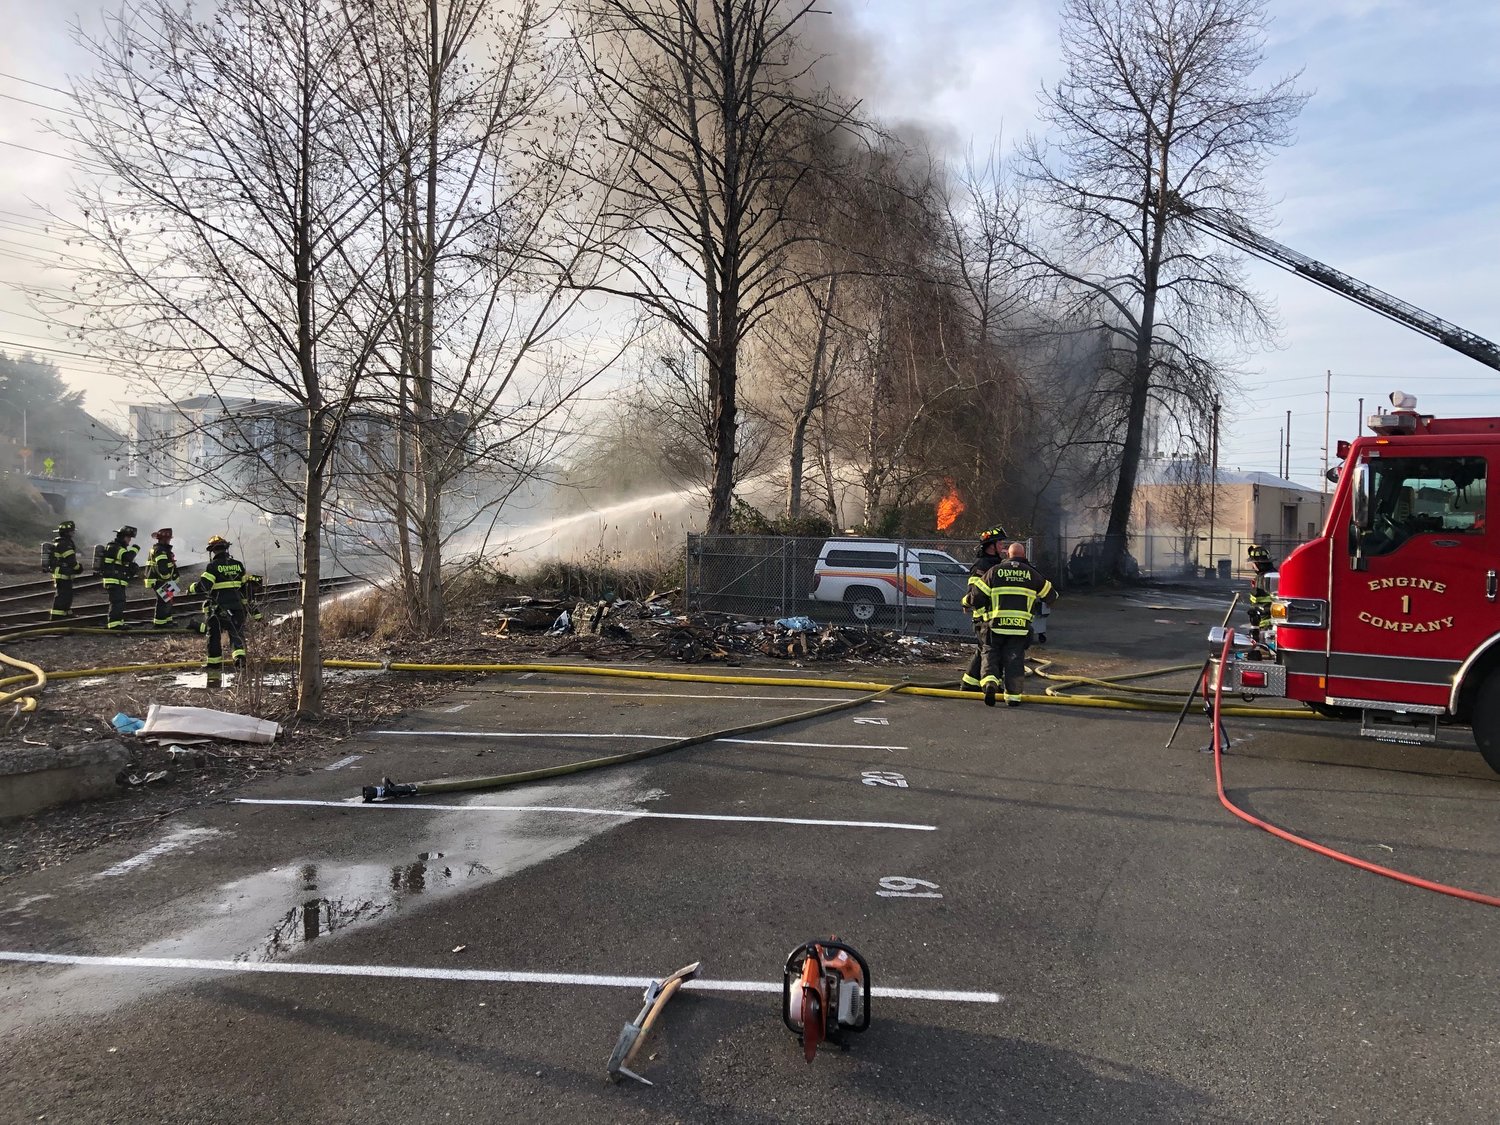 This is another view of the fire at 511 7th Avenue SE in Olympia on Sat., March 18, 2023 at approximately 5:50 p.m.